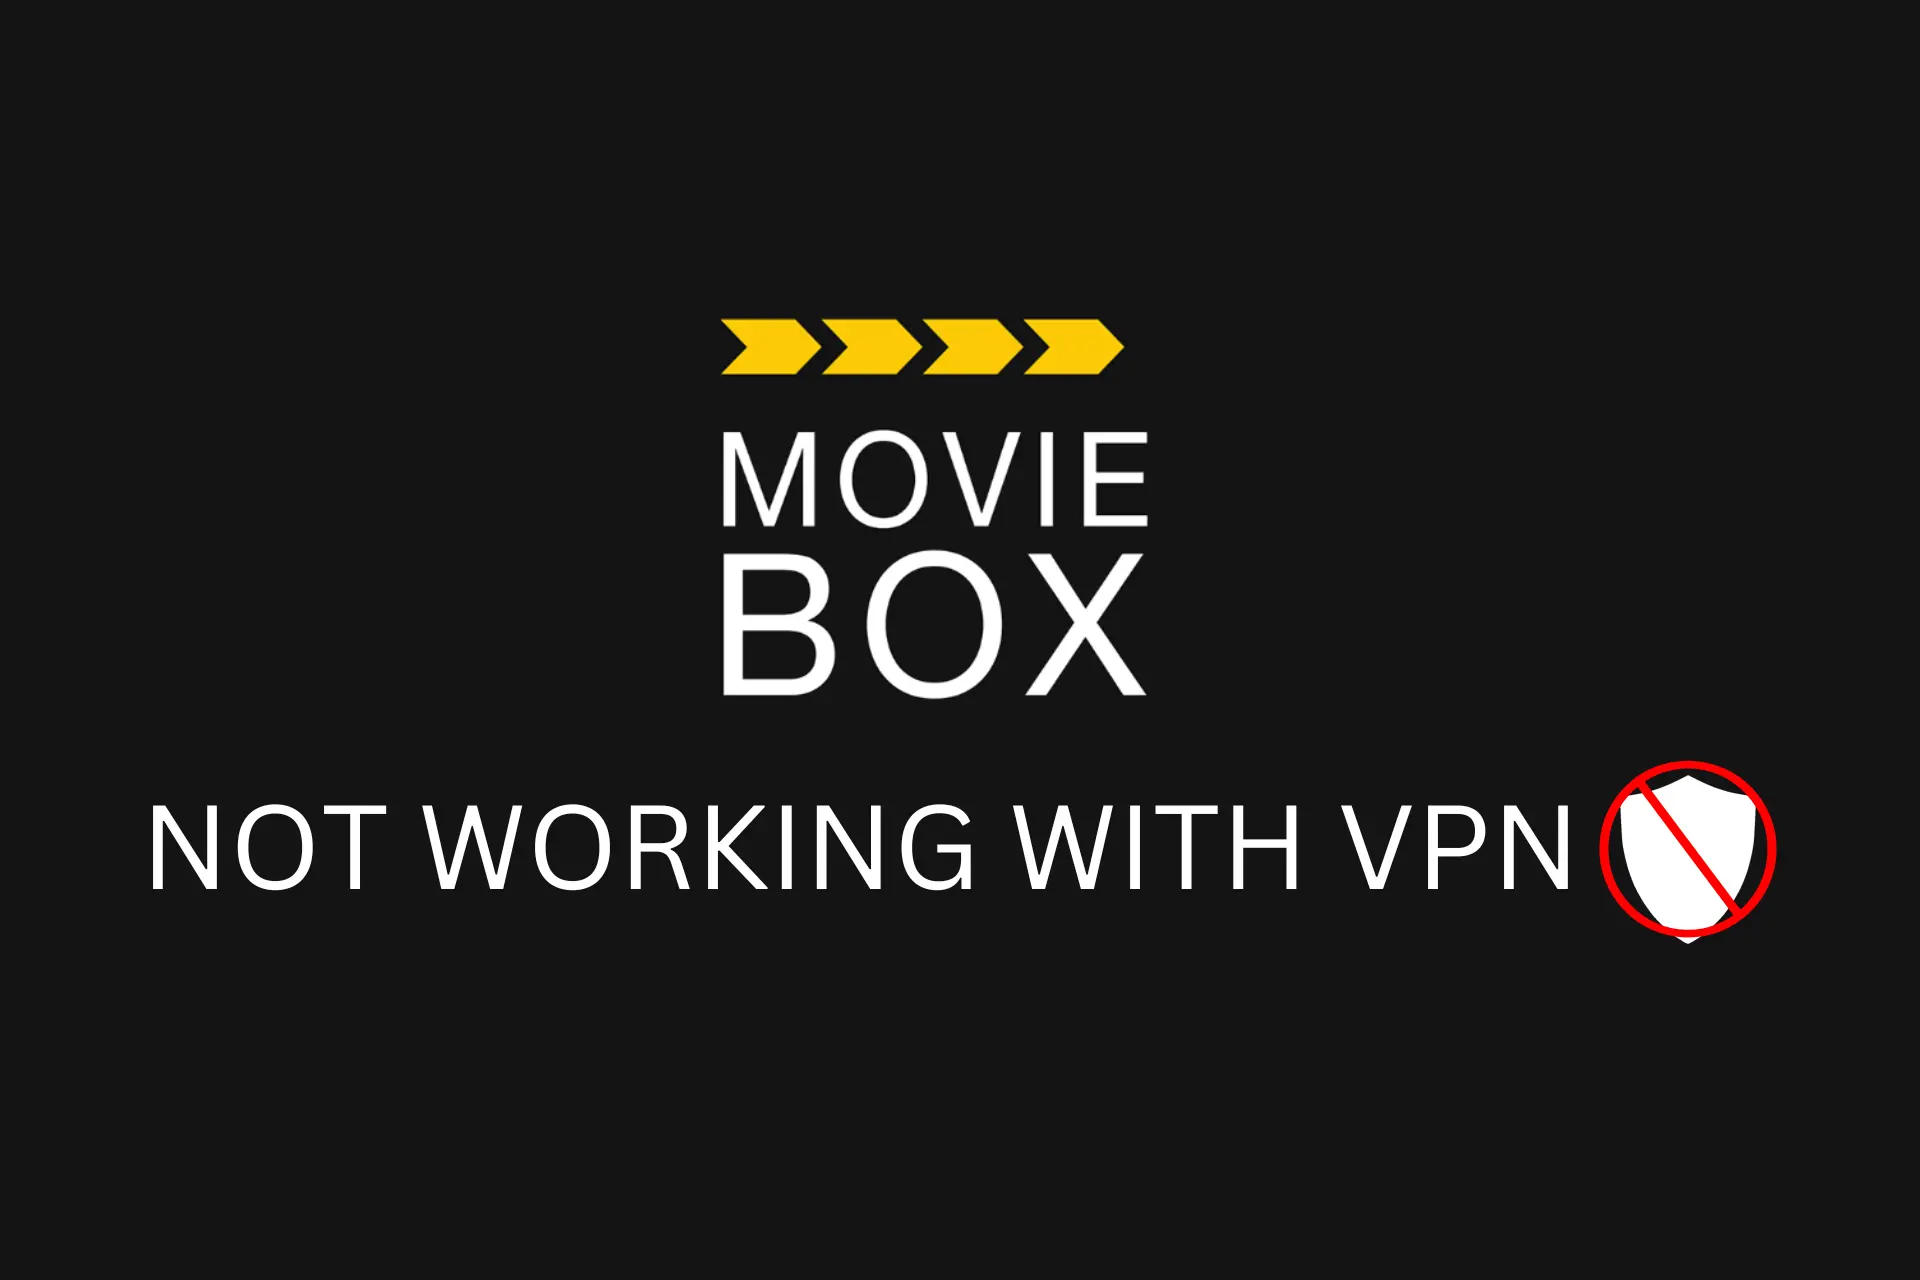 moviebox not working with vpn